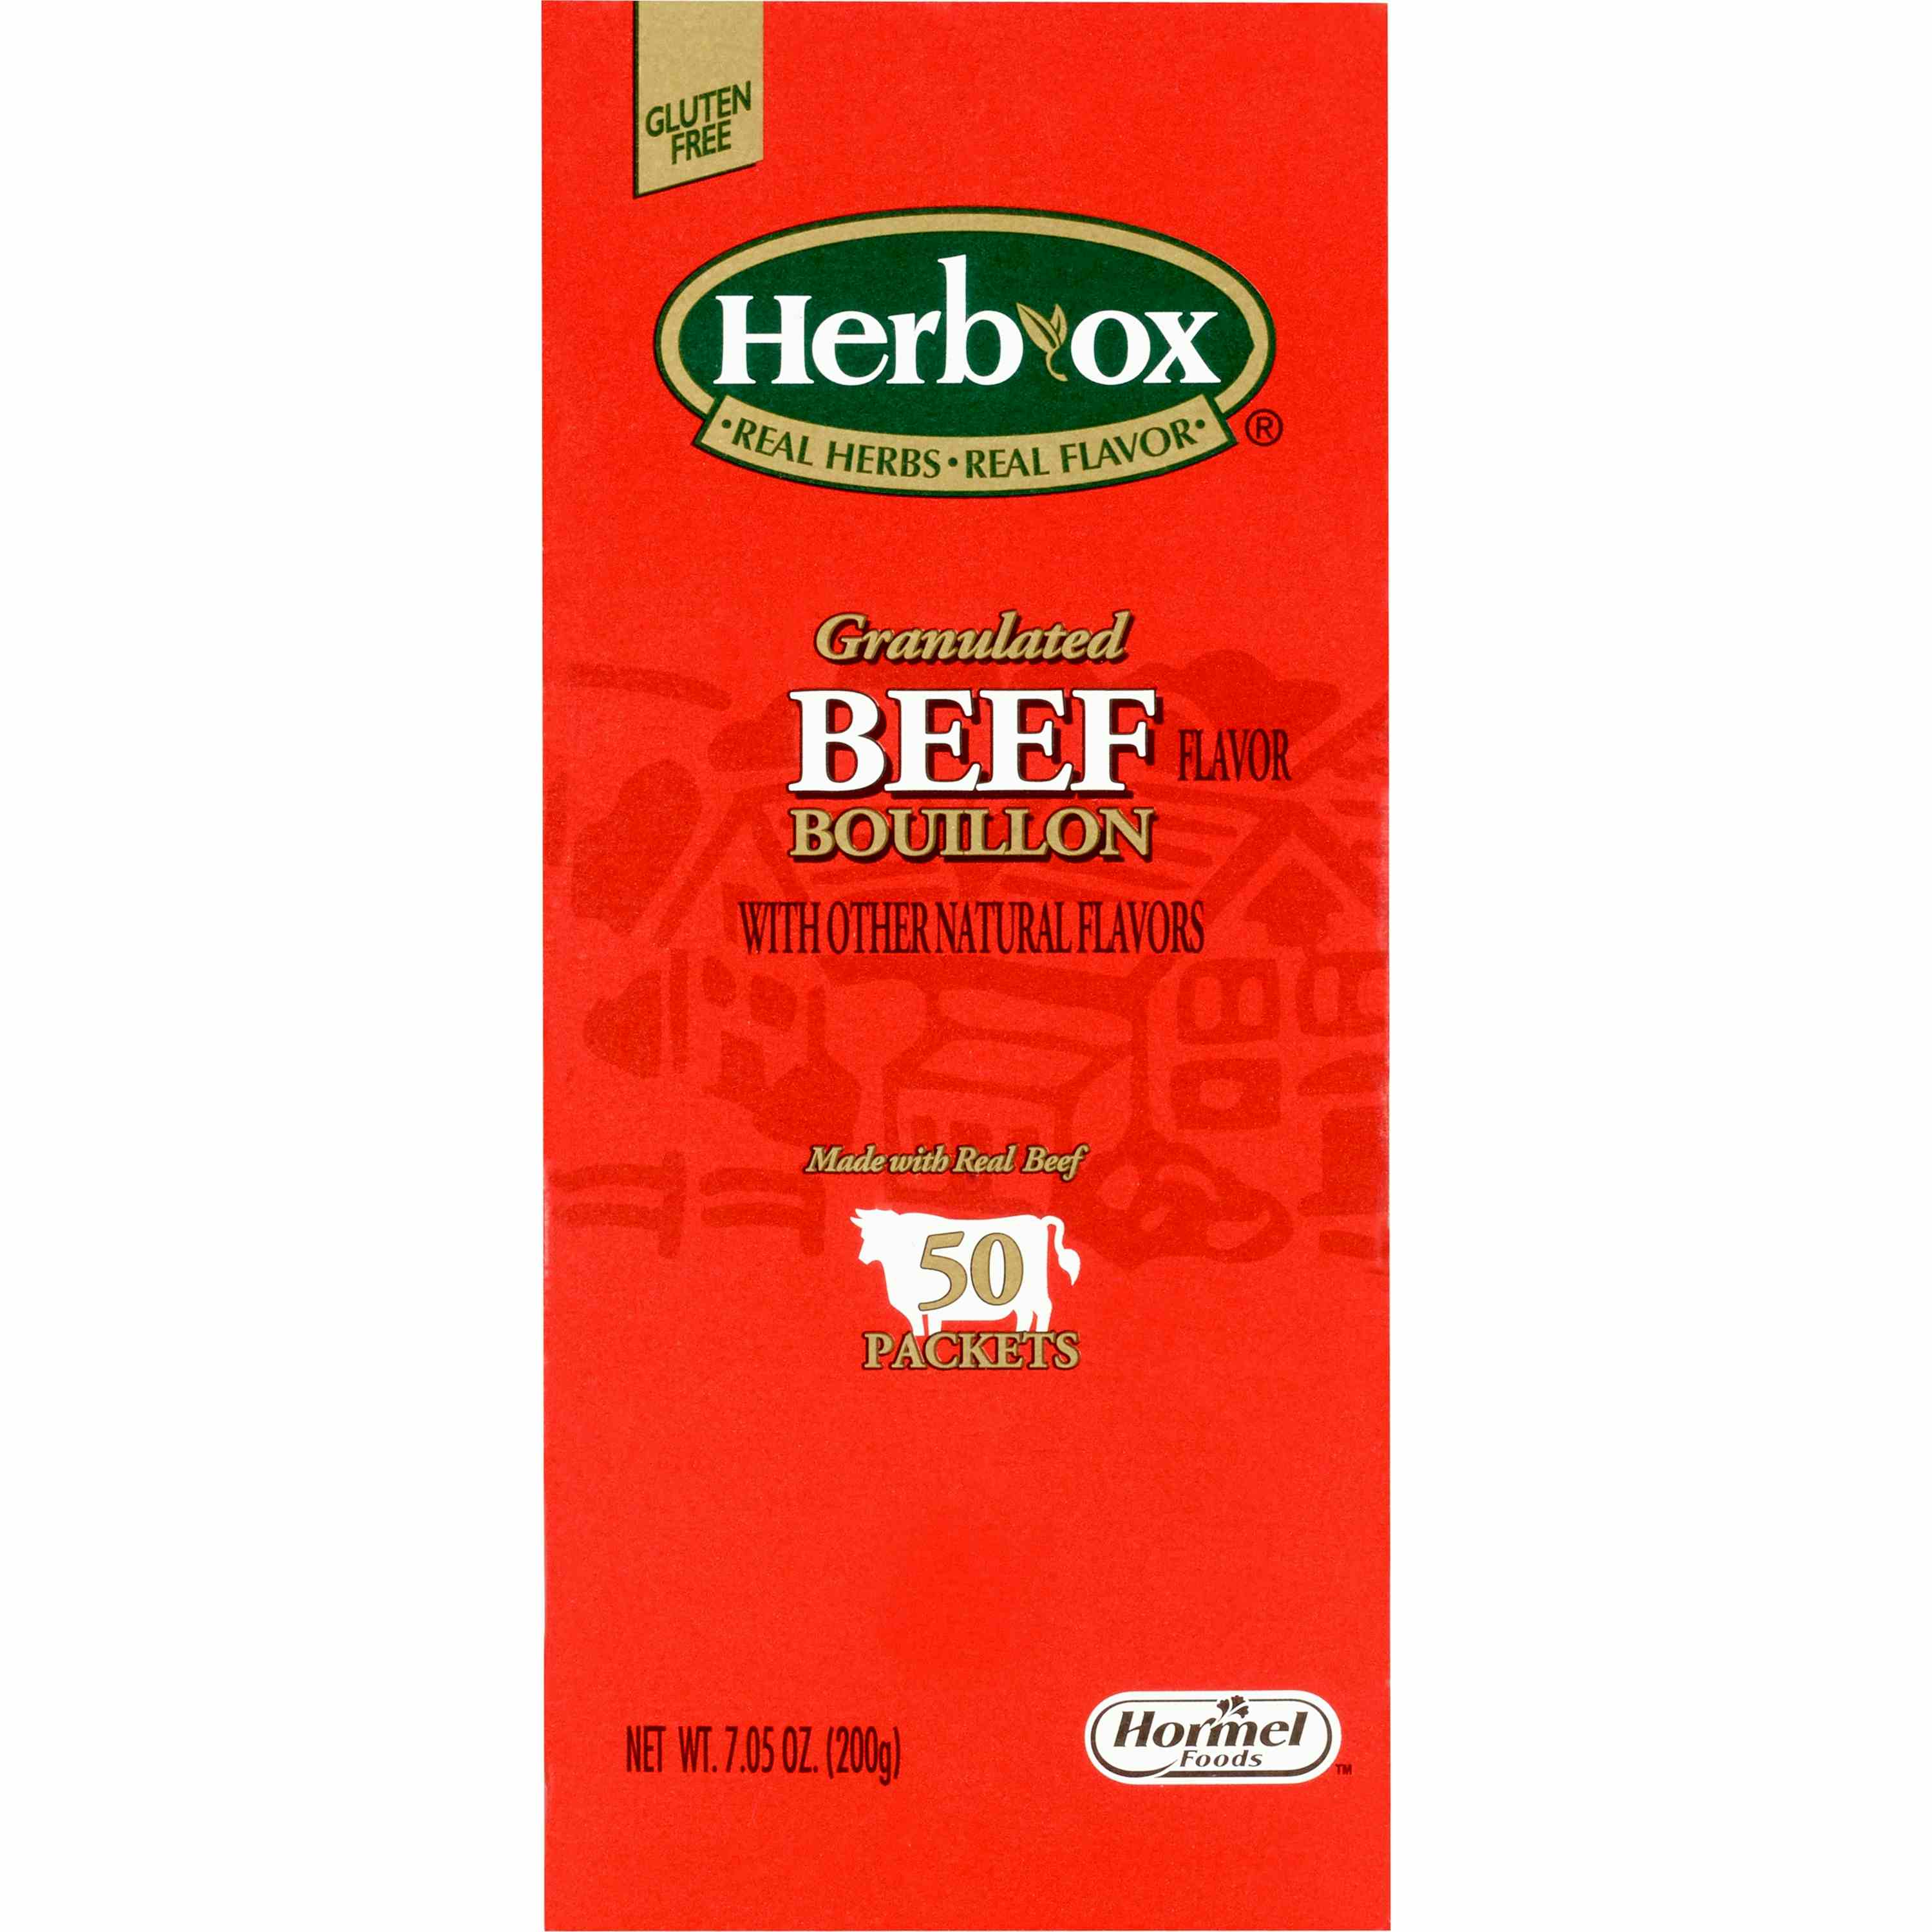 Herb-Ox Beef Flavor Bouillon Instant Broth, 35188, Box of 50 (300 Packets per box)